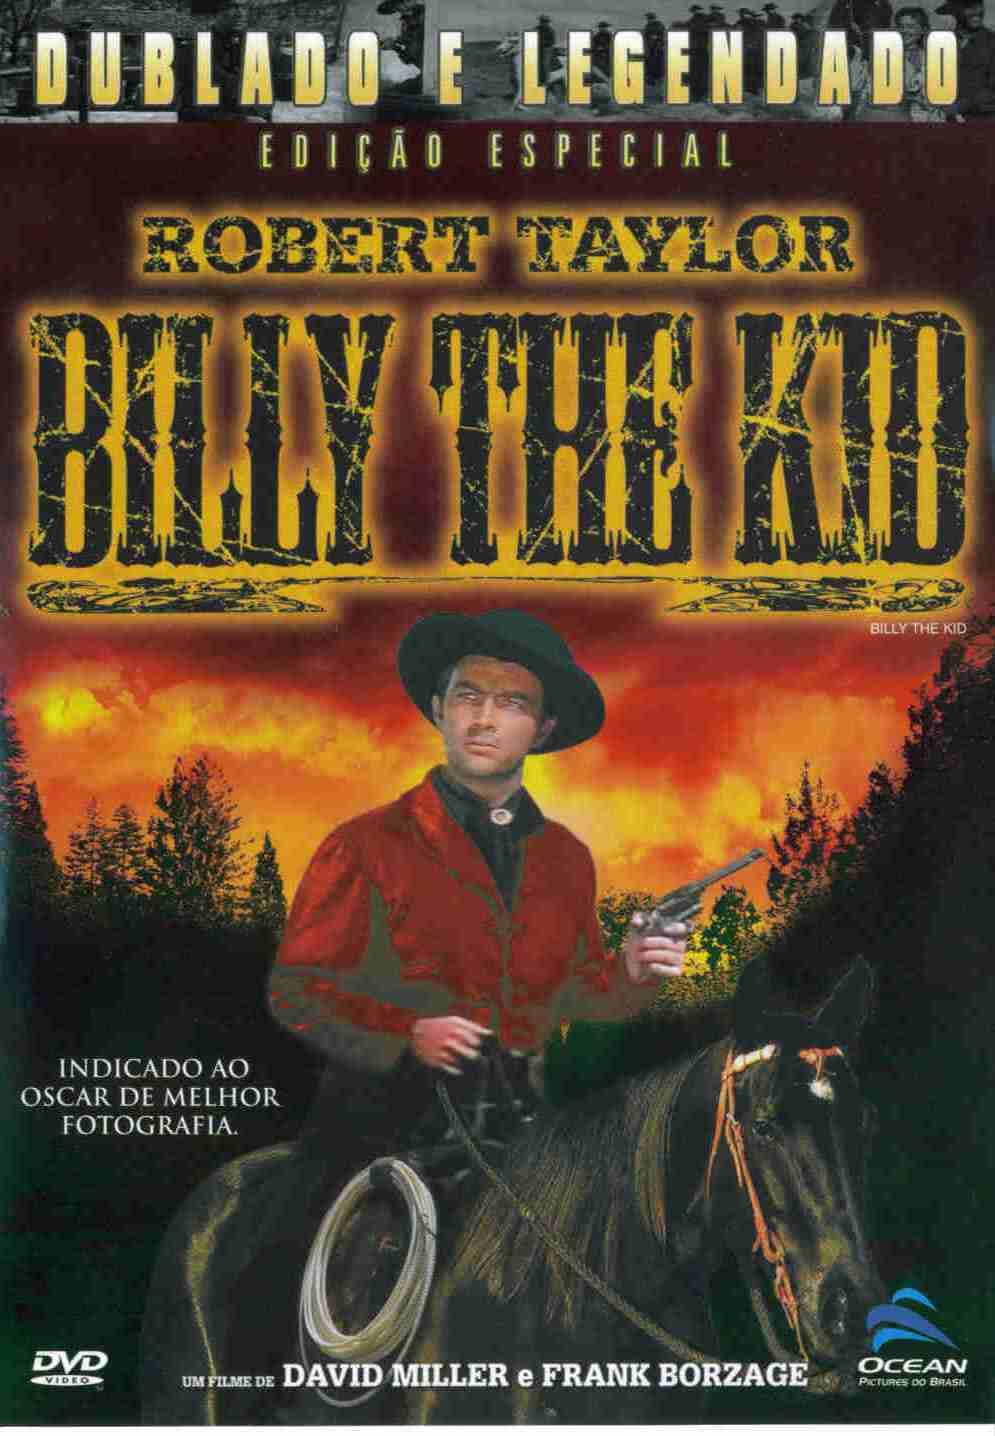 BILLY THE KID 